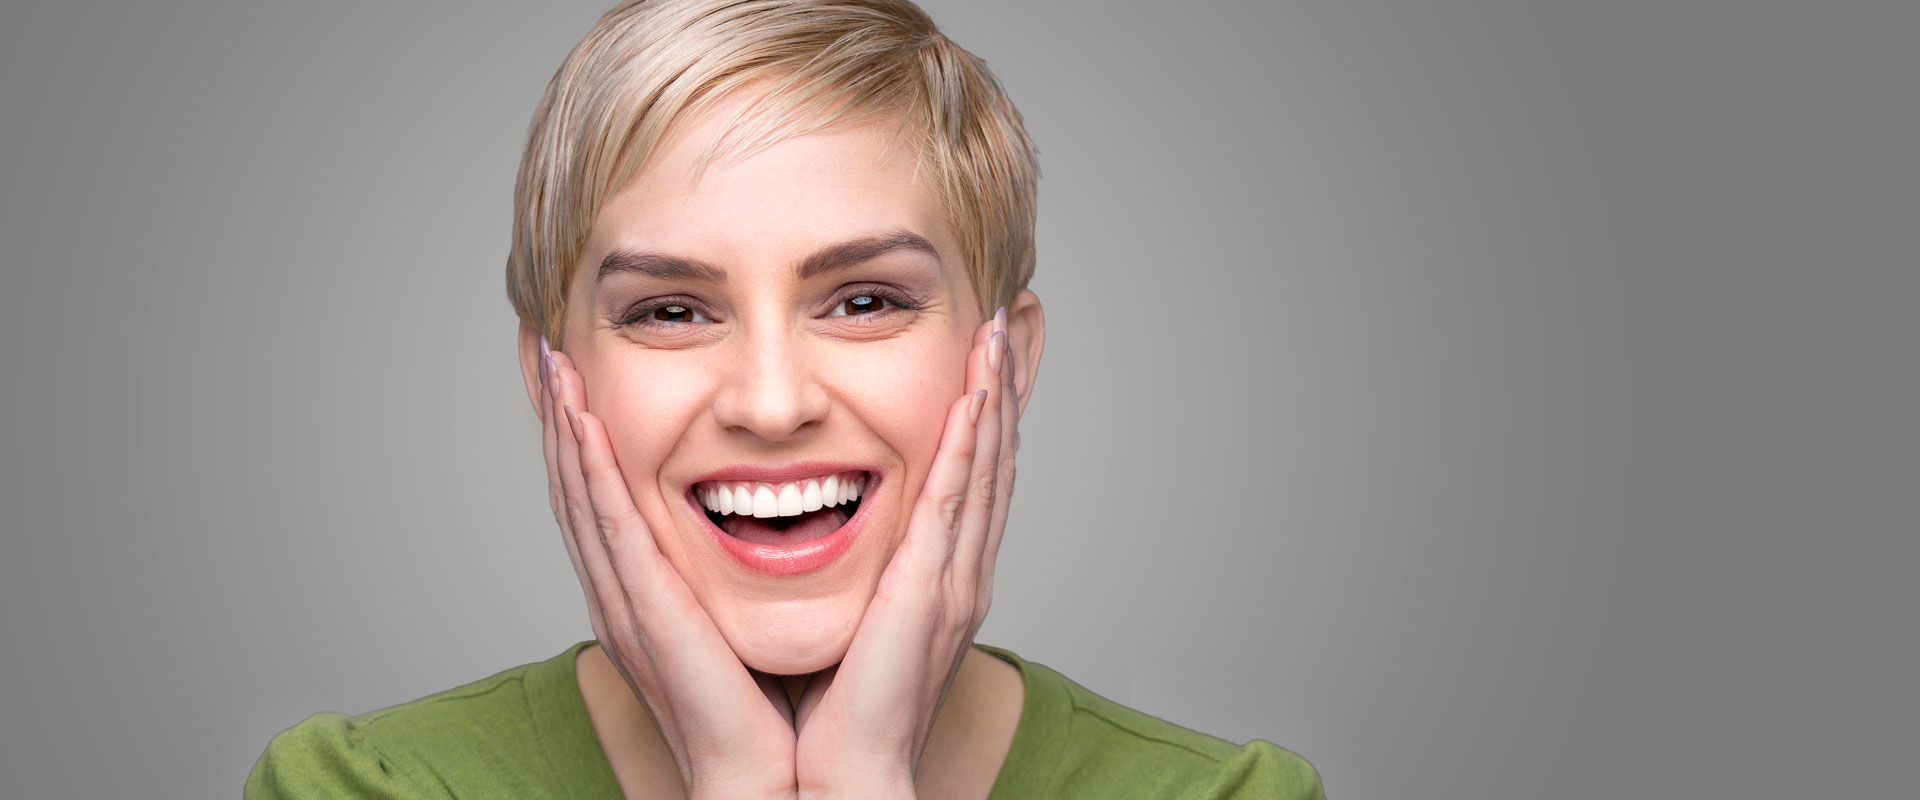 Woman with beautiful and whiten teeth